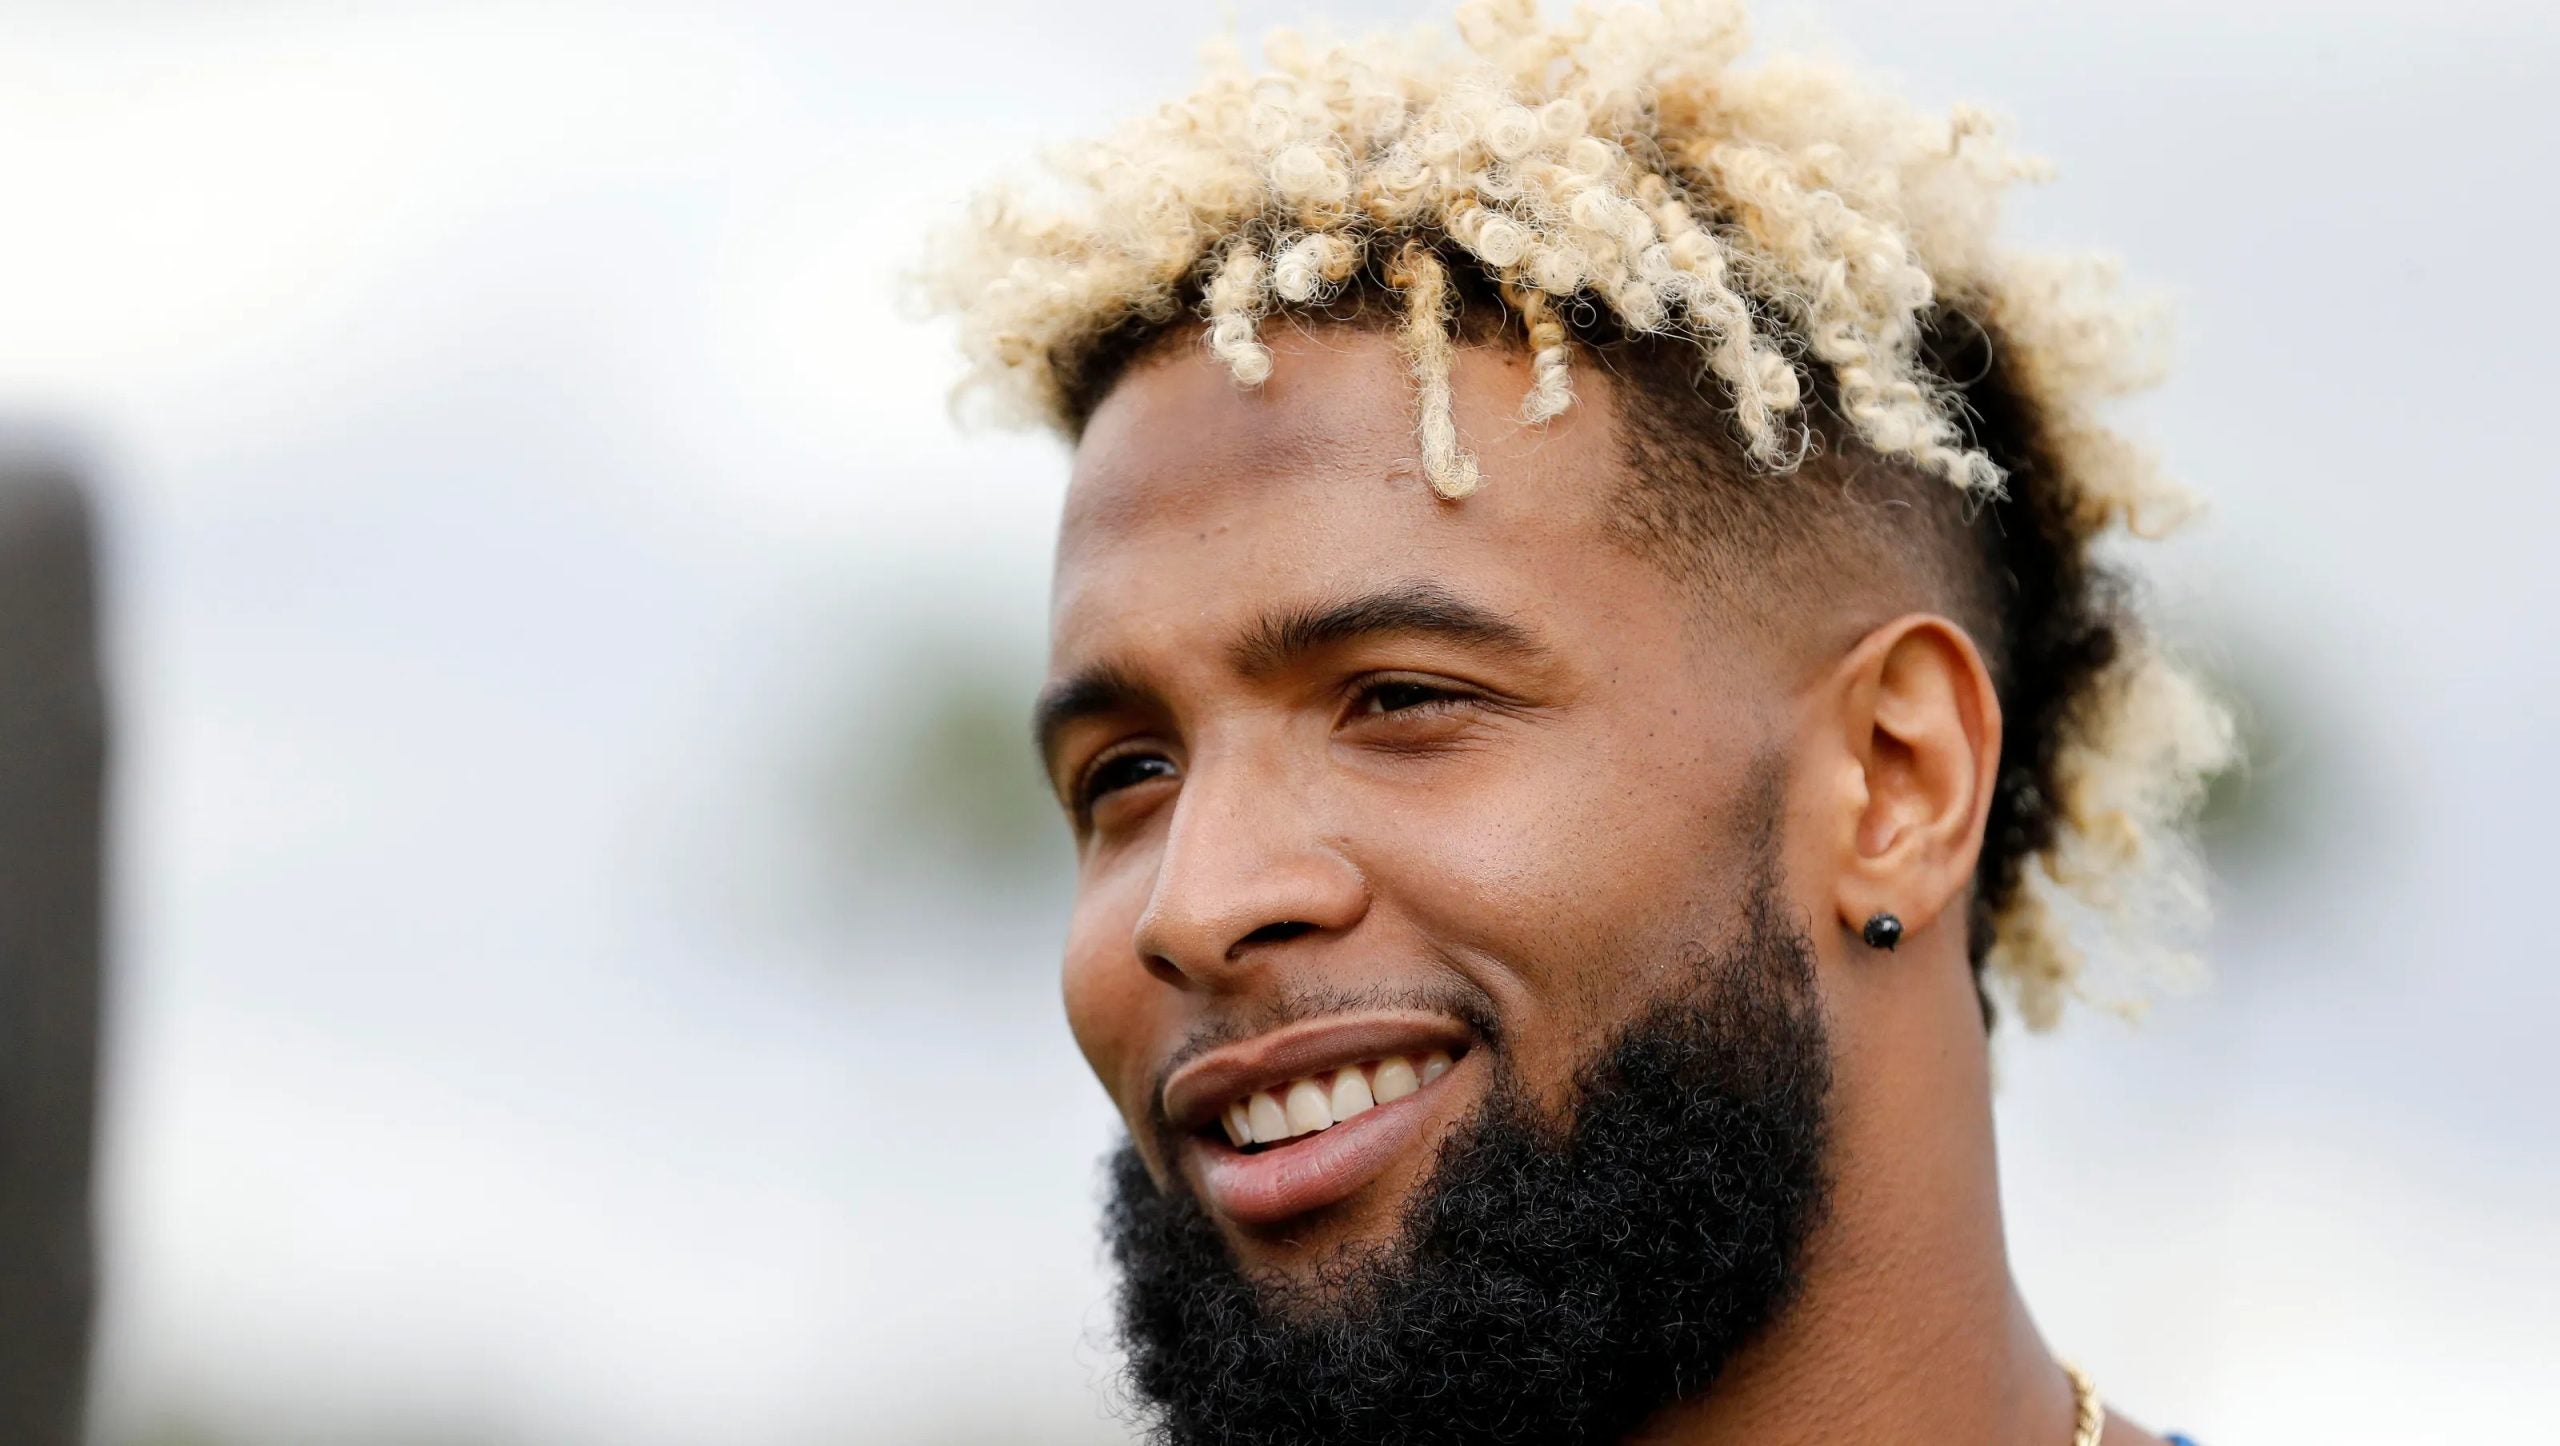 Odell Beckham Jr. Partners With Cash App To Illustrate How He Manages His Money